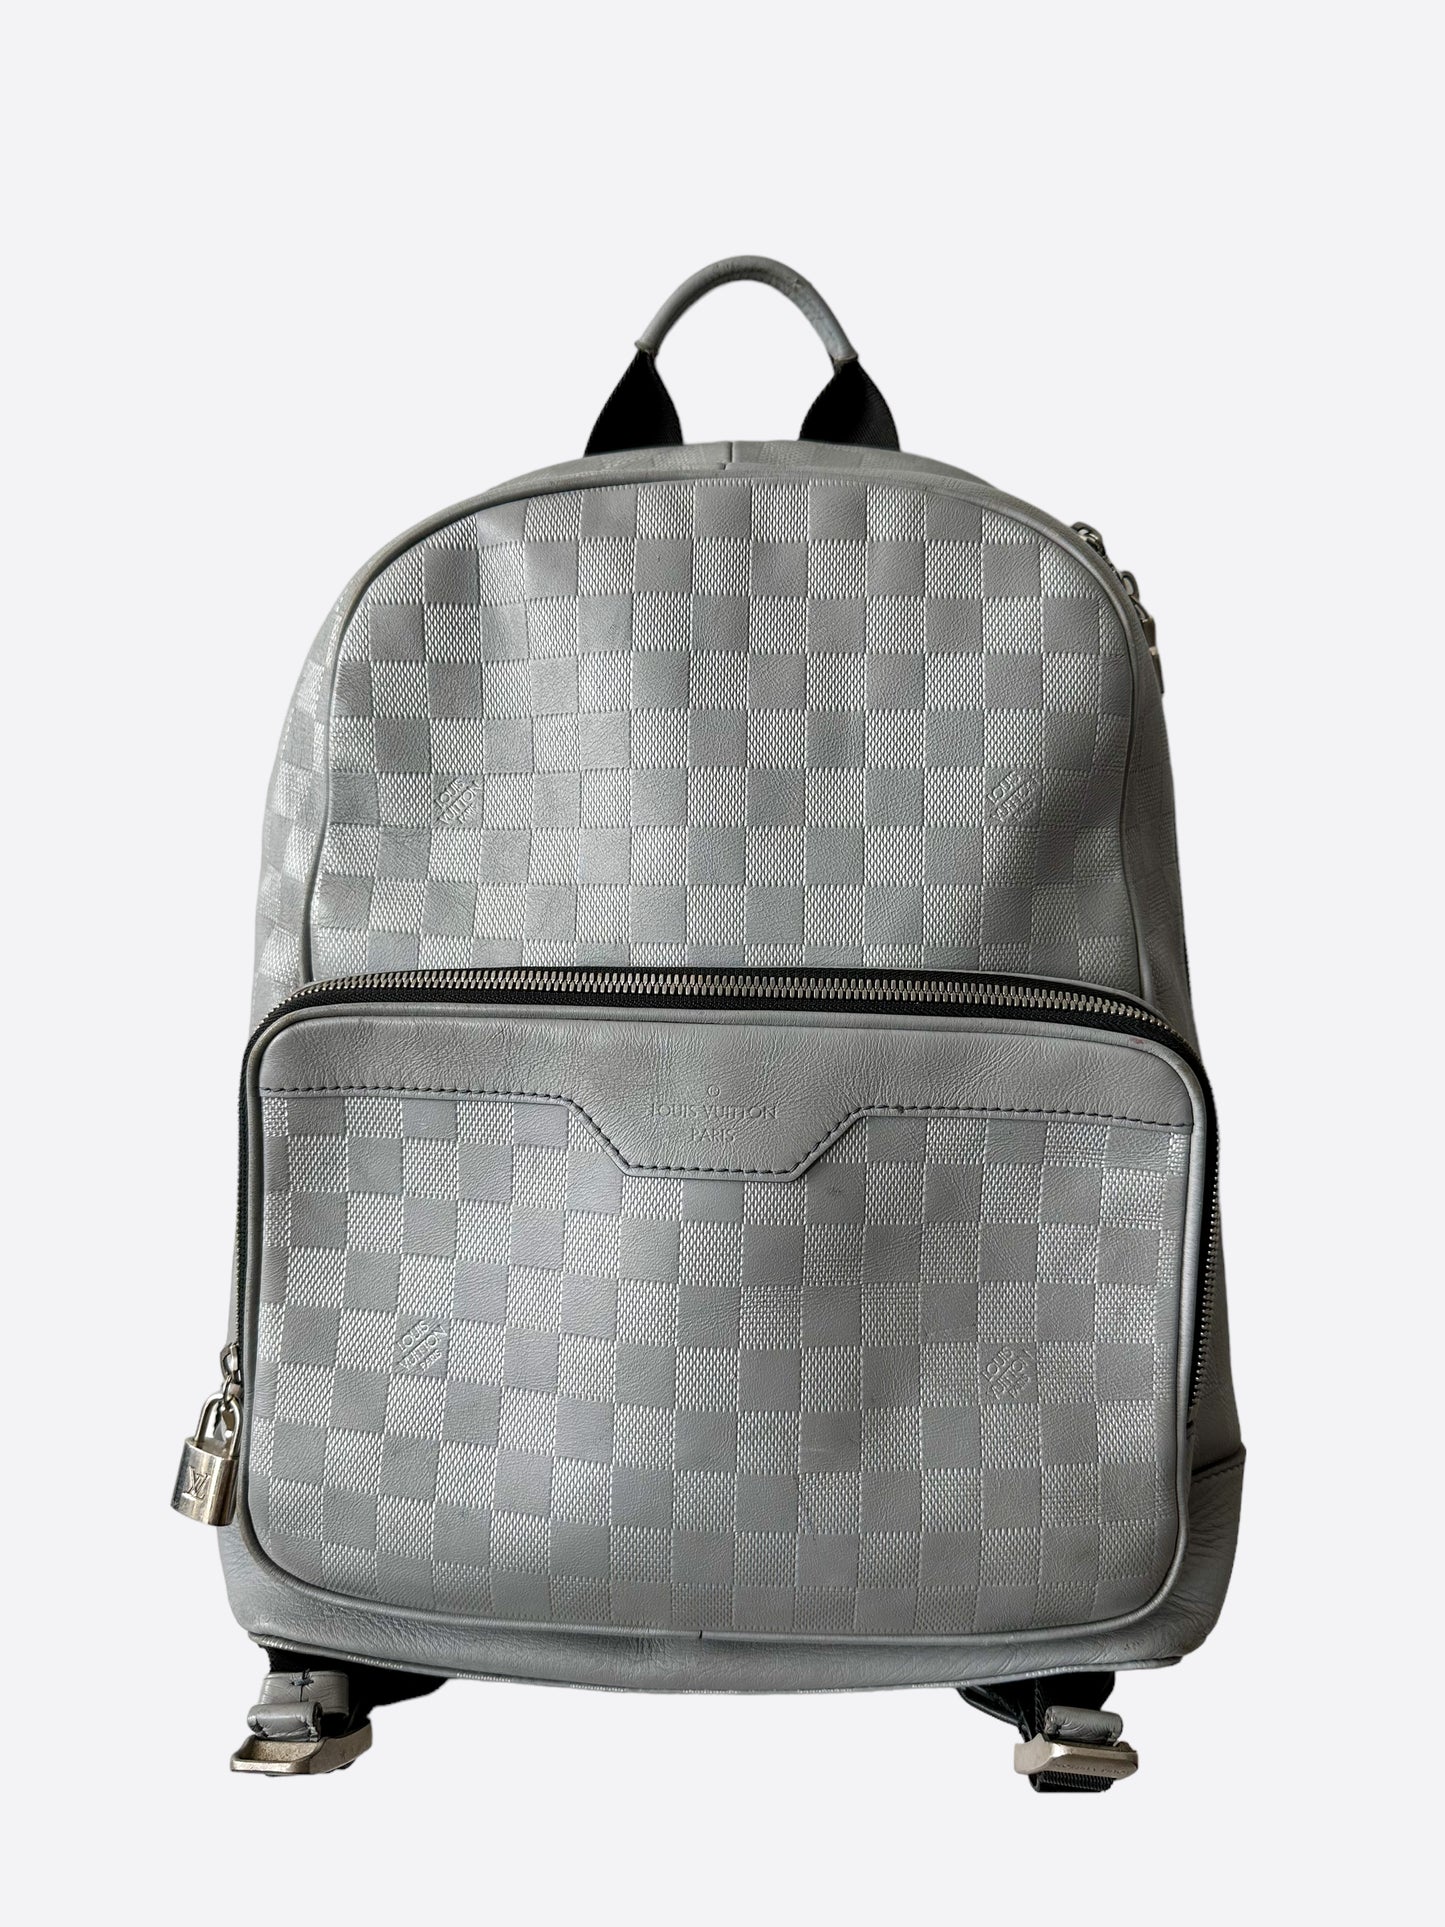 Louis Vuitton Damier Infini Campus Backpack by Ann's Fabulous Finds